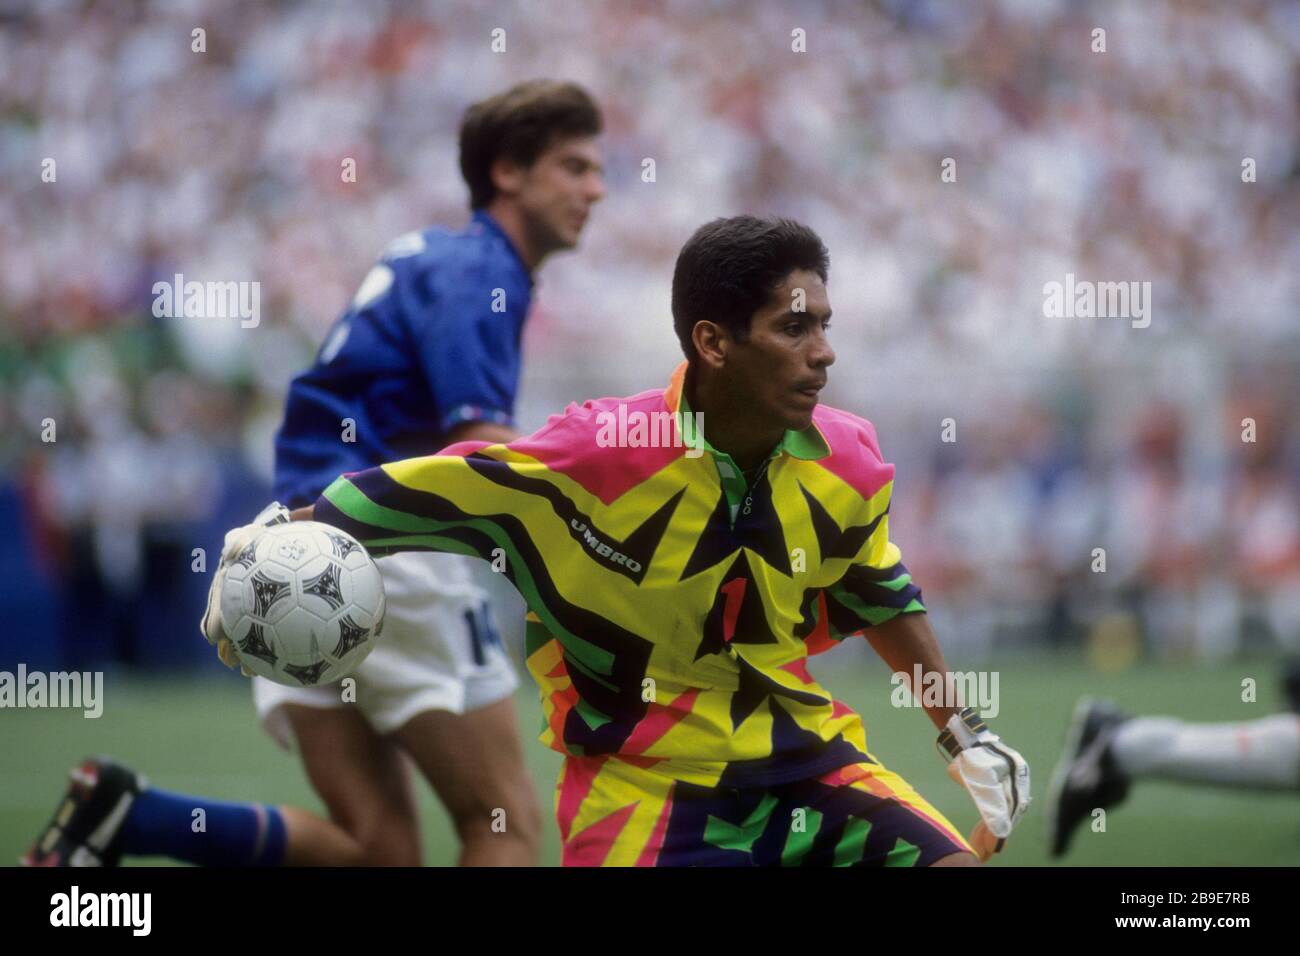 Image number 05849875 date 28 06 1994 Copyright imago WEREK Goalkeeper Jorge Campos Mexico Vdia horizontal World Cup 1994 international match National team National jersey Italy Mexico 1 1 Washington DC D C Football World Cup men Team Single Action shot Human Beings Credit: Pro Shots/Alamy Live News Stock Photo